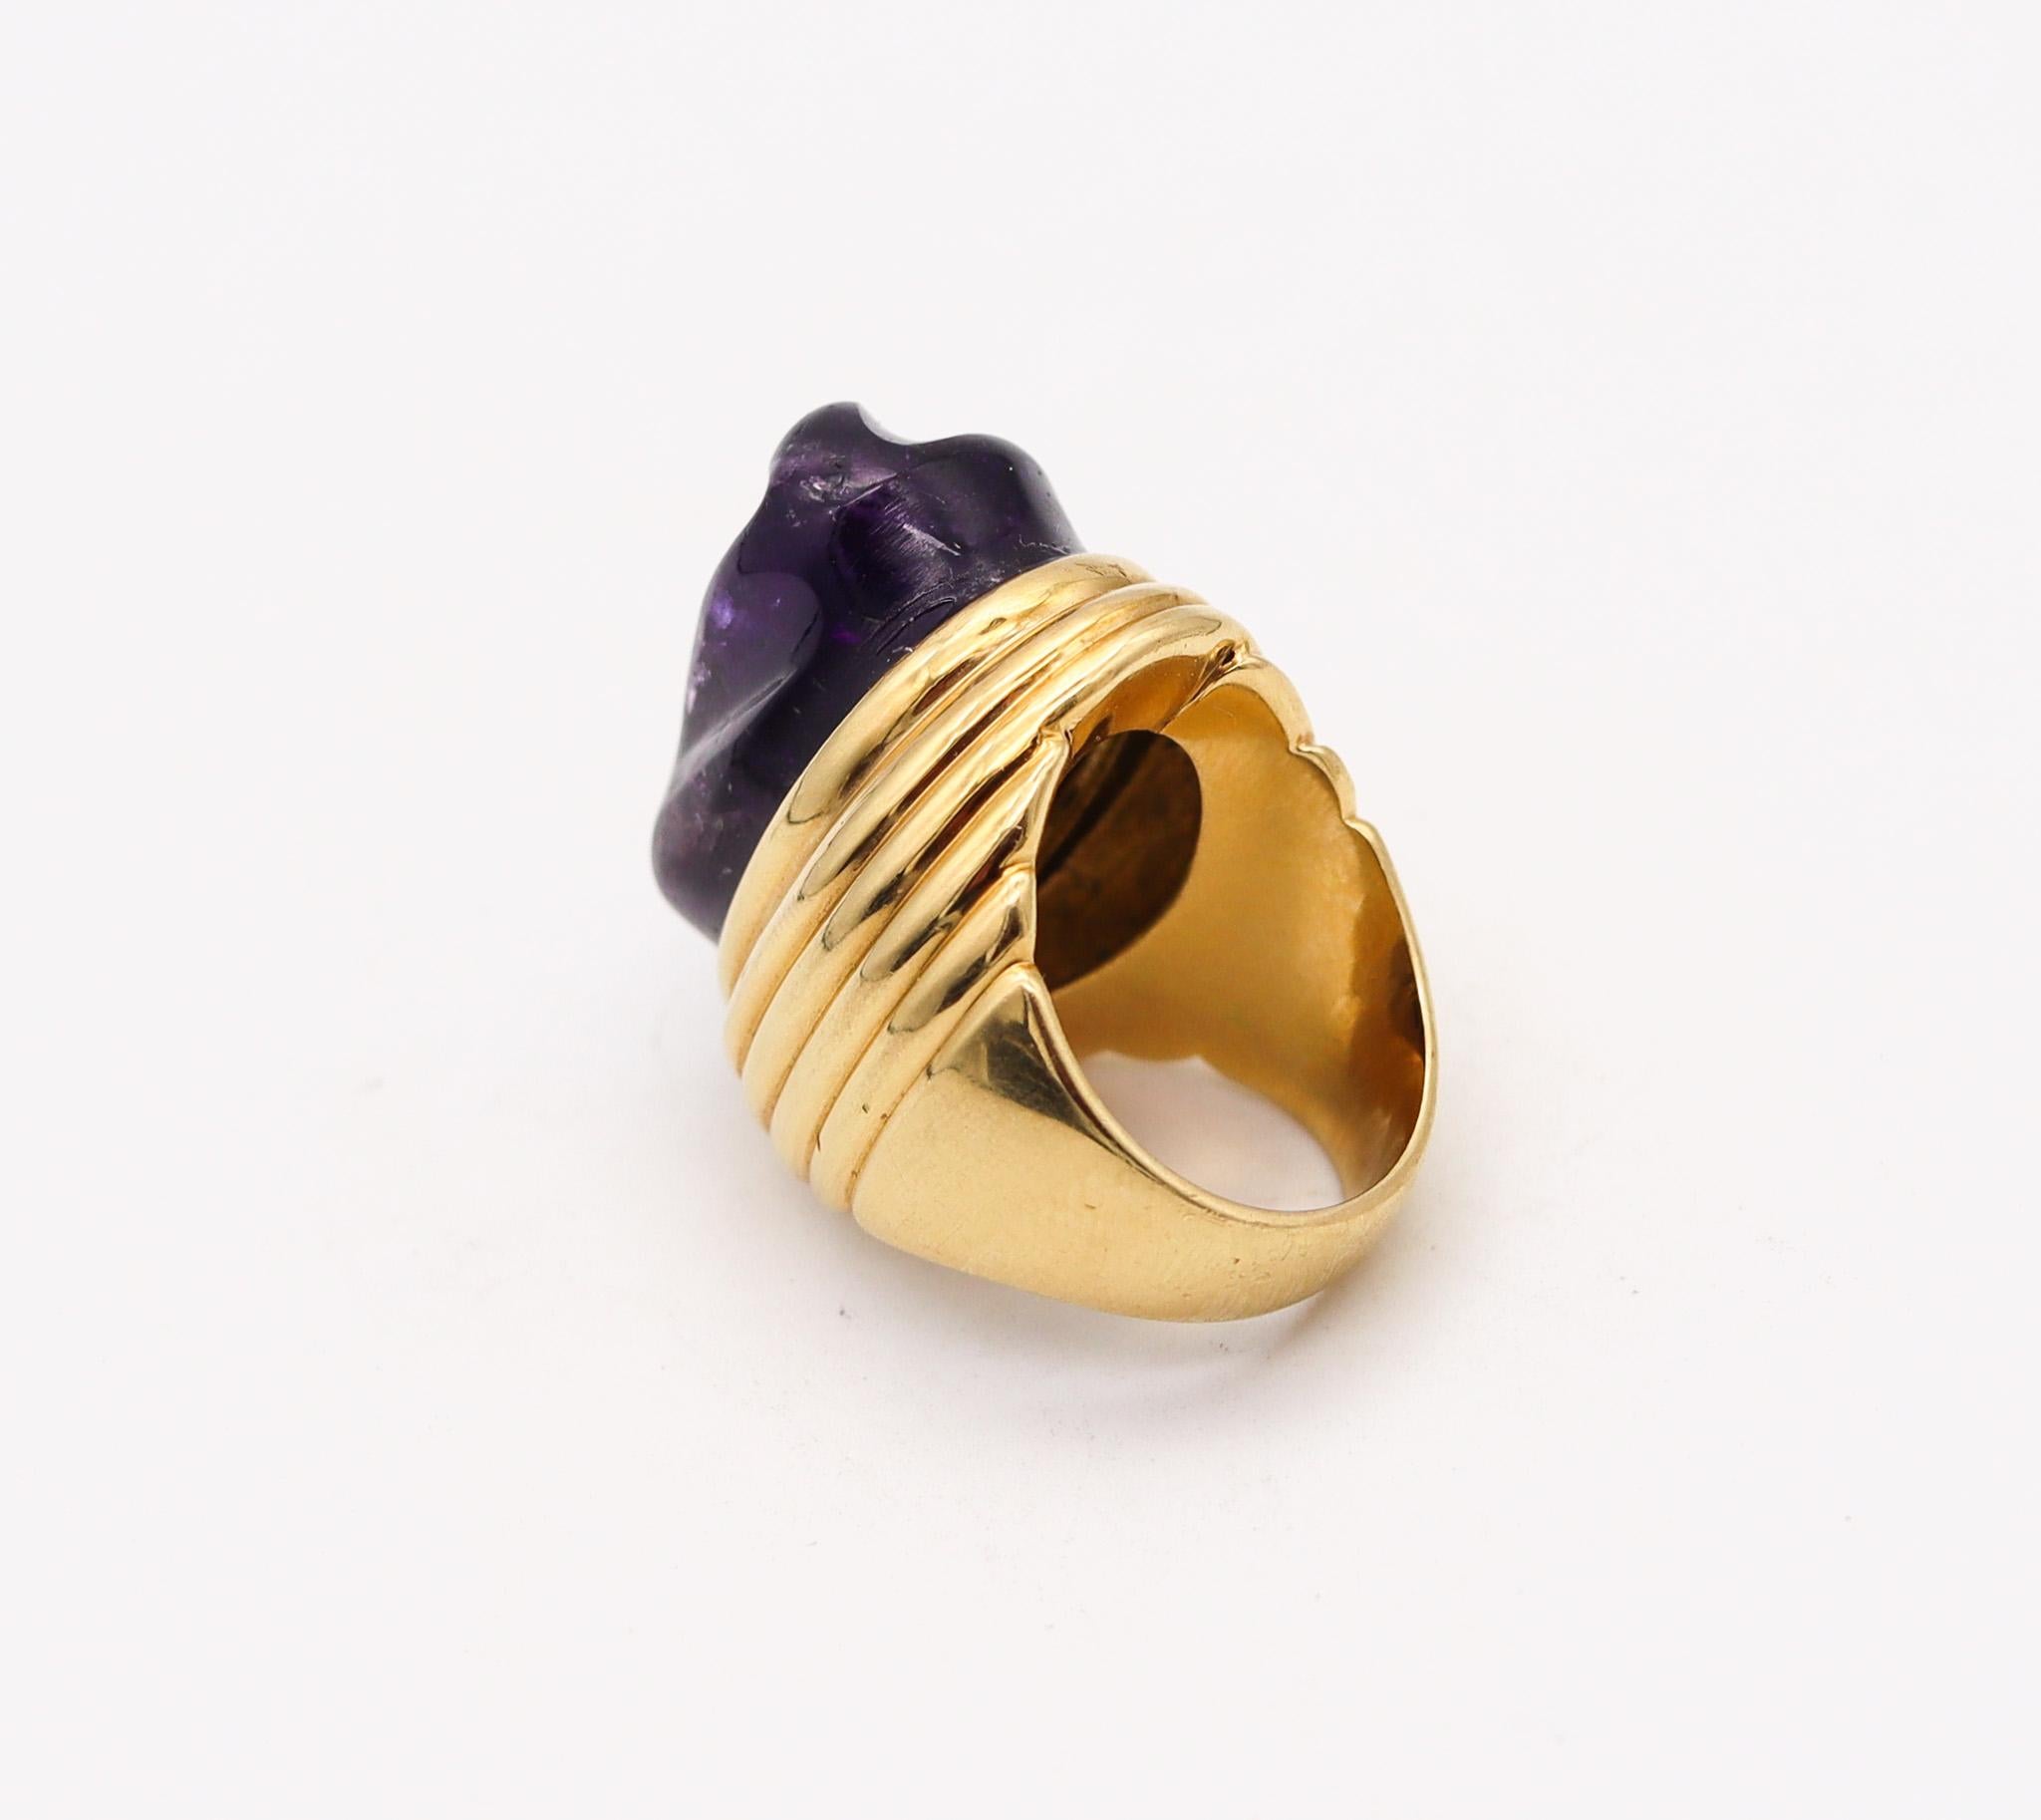 Cabochon Burle Marx 1960 Brazil Forma Livre Cocktail Ring in 18kt Gold 39 Cts Amethyst